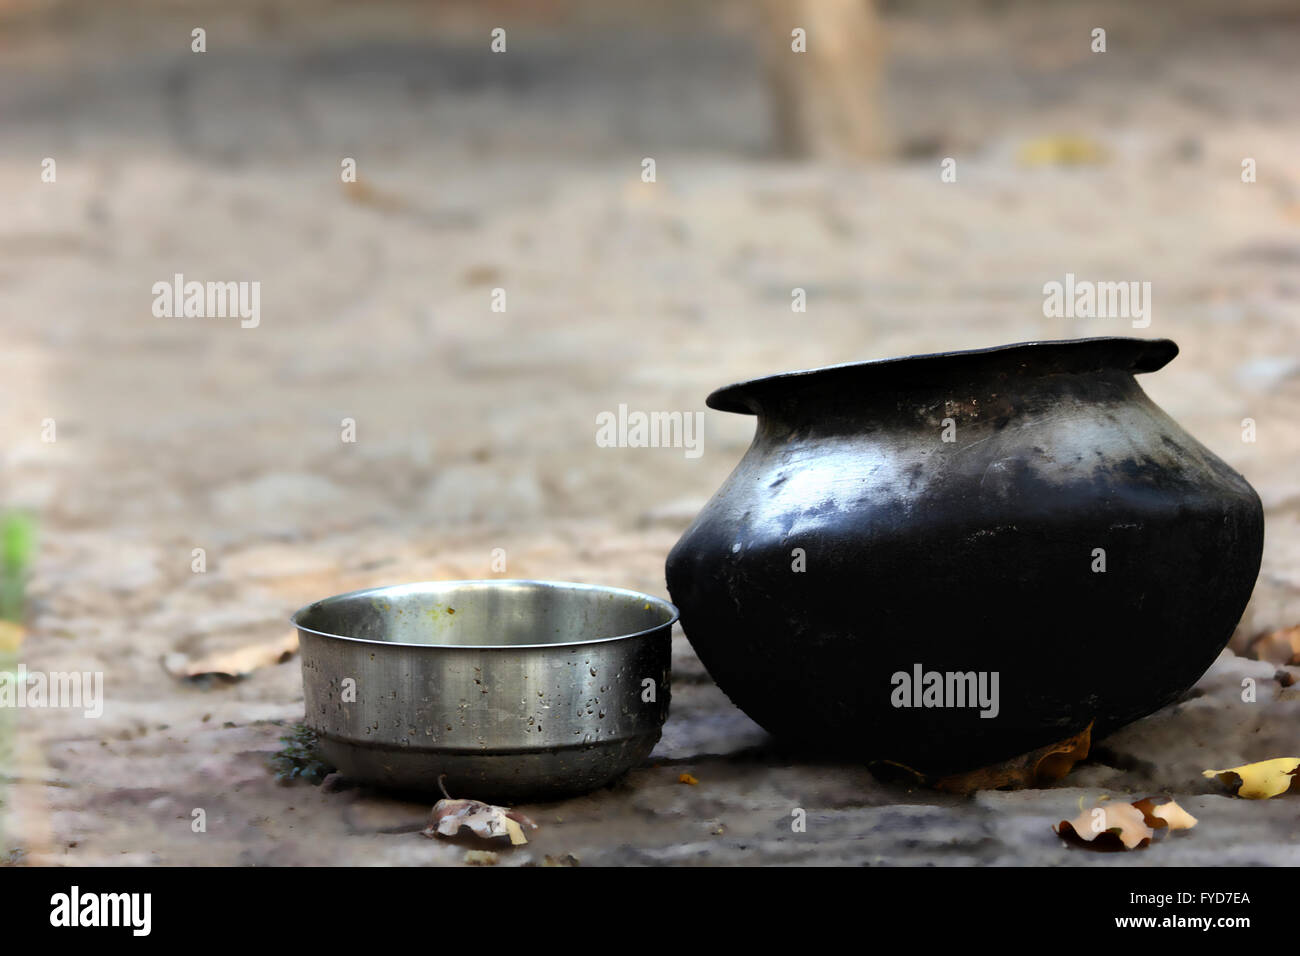 poverty and hunger - empty pots Stock Photo